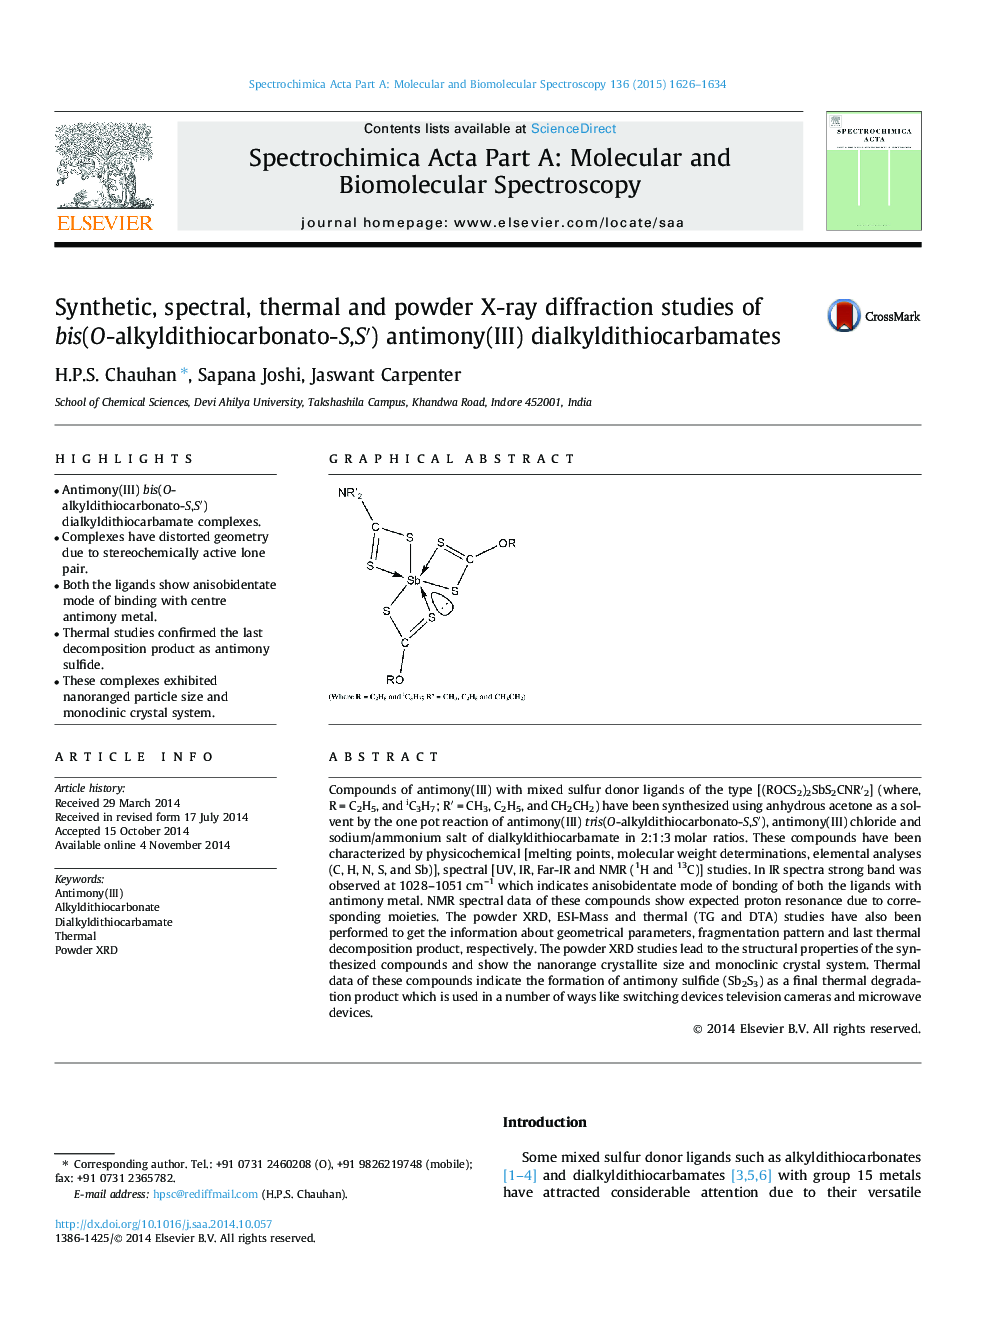 Synthetic, spectral, thermal and powder X-ray diffraction studies of bis(O-alkyldithiocarbonato-S,S′) antimony(III) dialkyldithiocarbamates